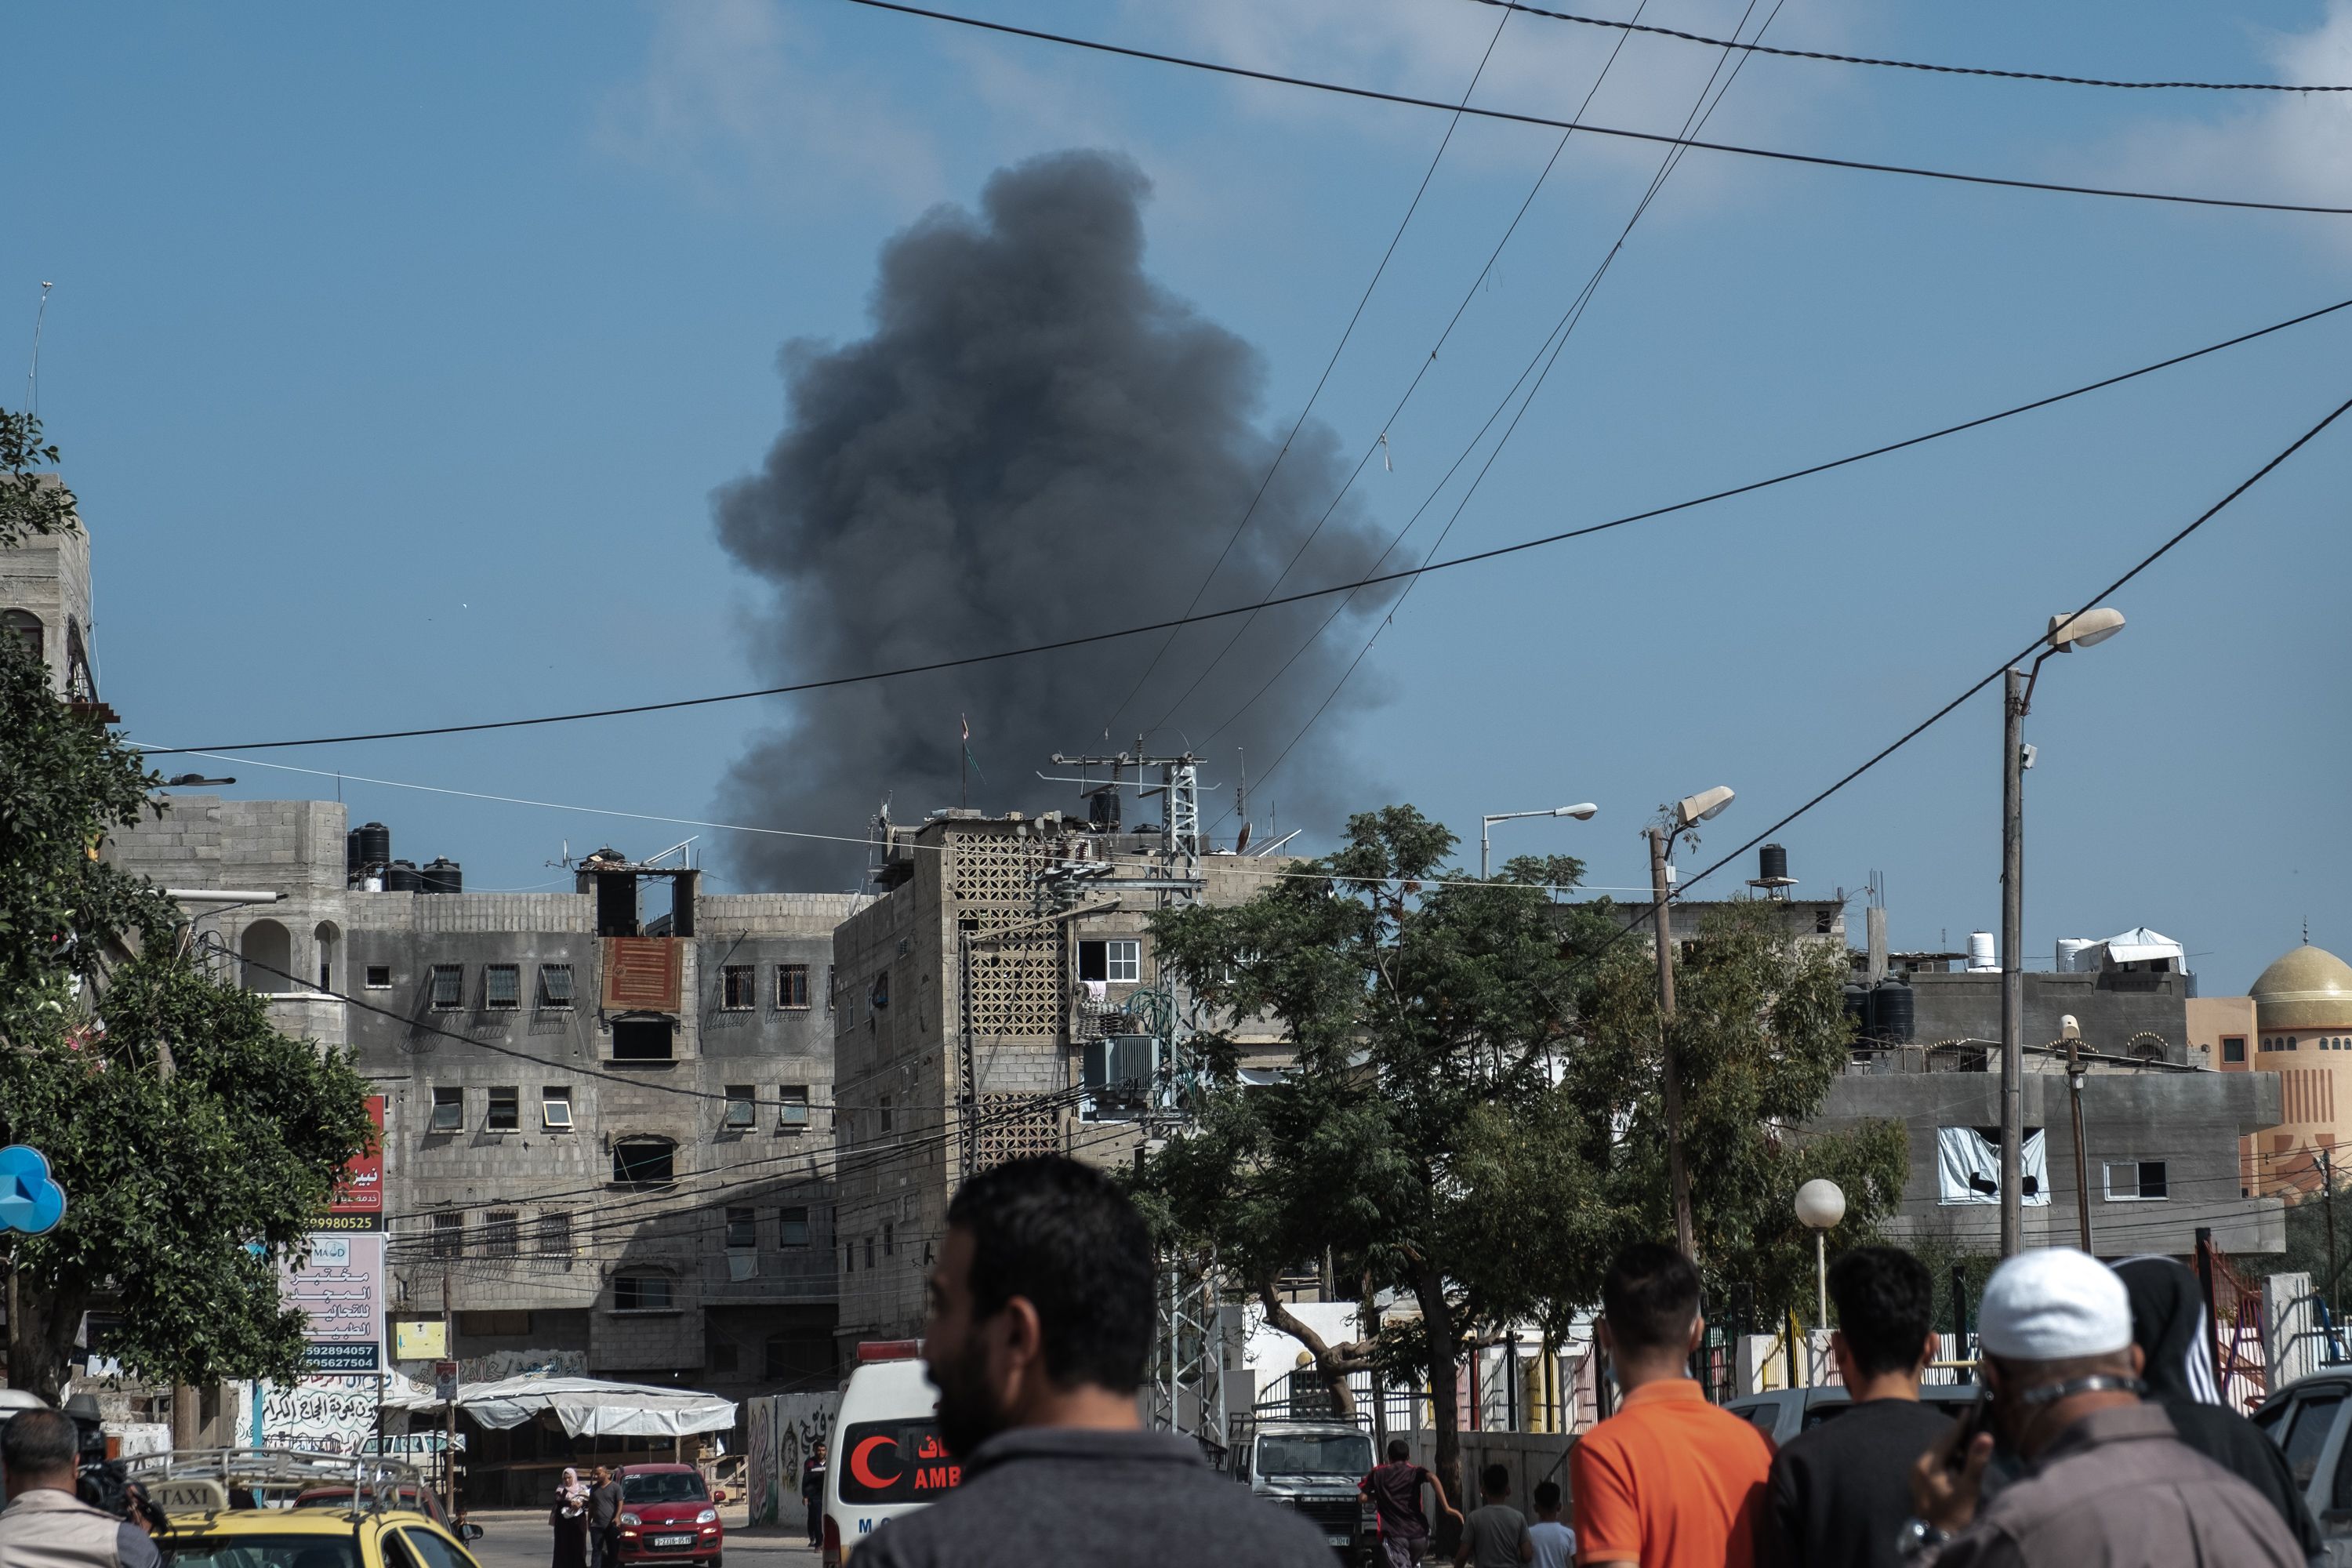 A smoking building in the Gaza Strip.